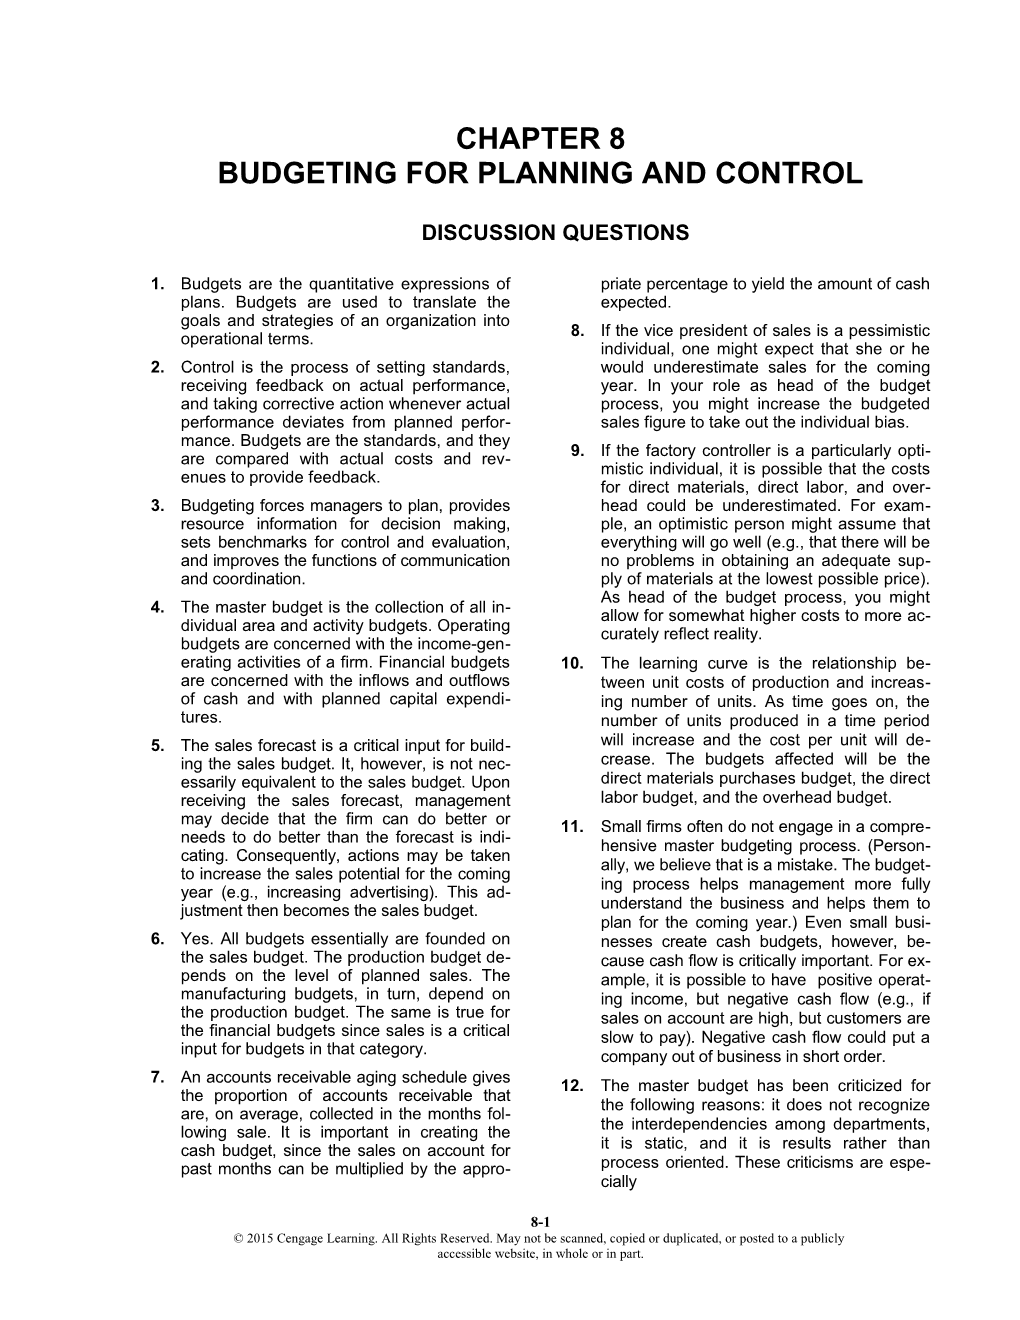 Budgeting for Planning and Control s1